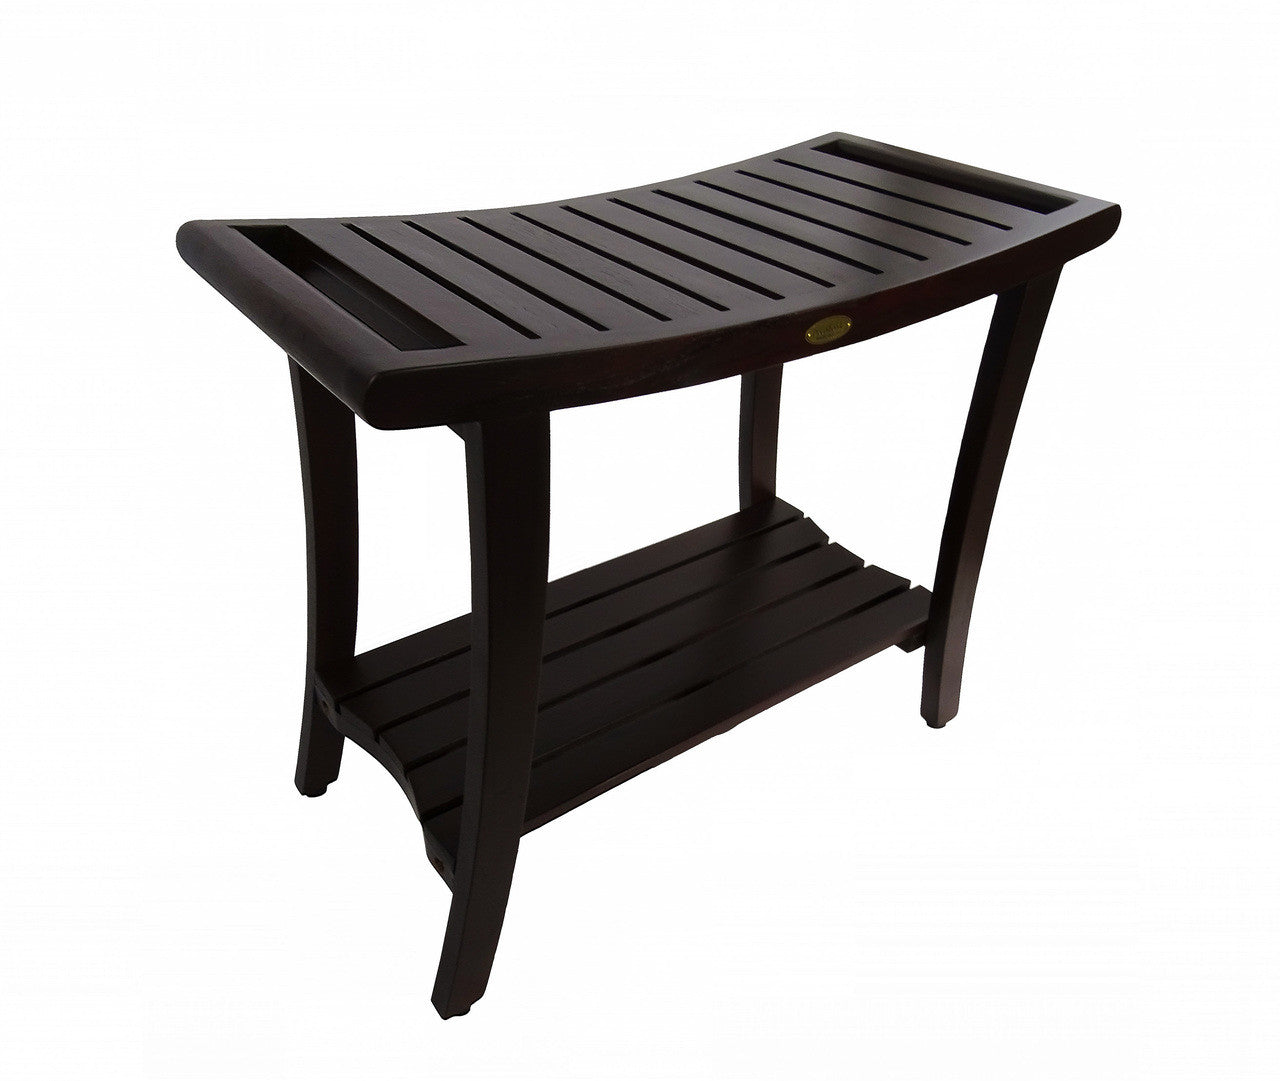 DecoTeak® Harmony® 30"L Teak Wood Bench with Shelf and LiftAide Arms in Woodland Brown Finish - Extended Height